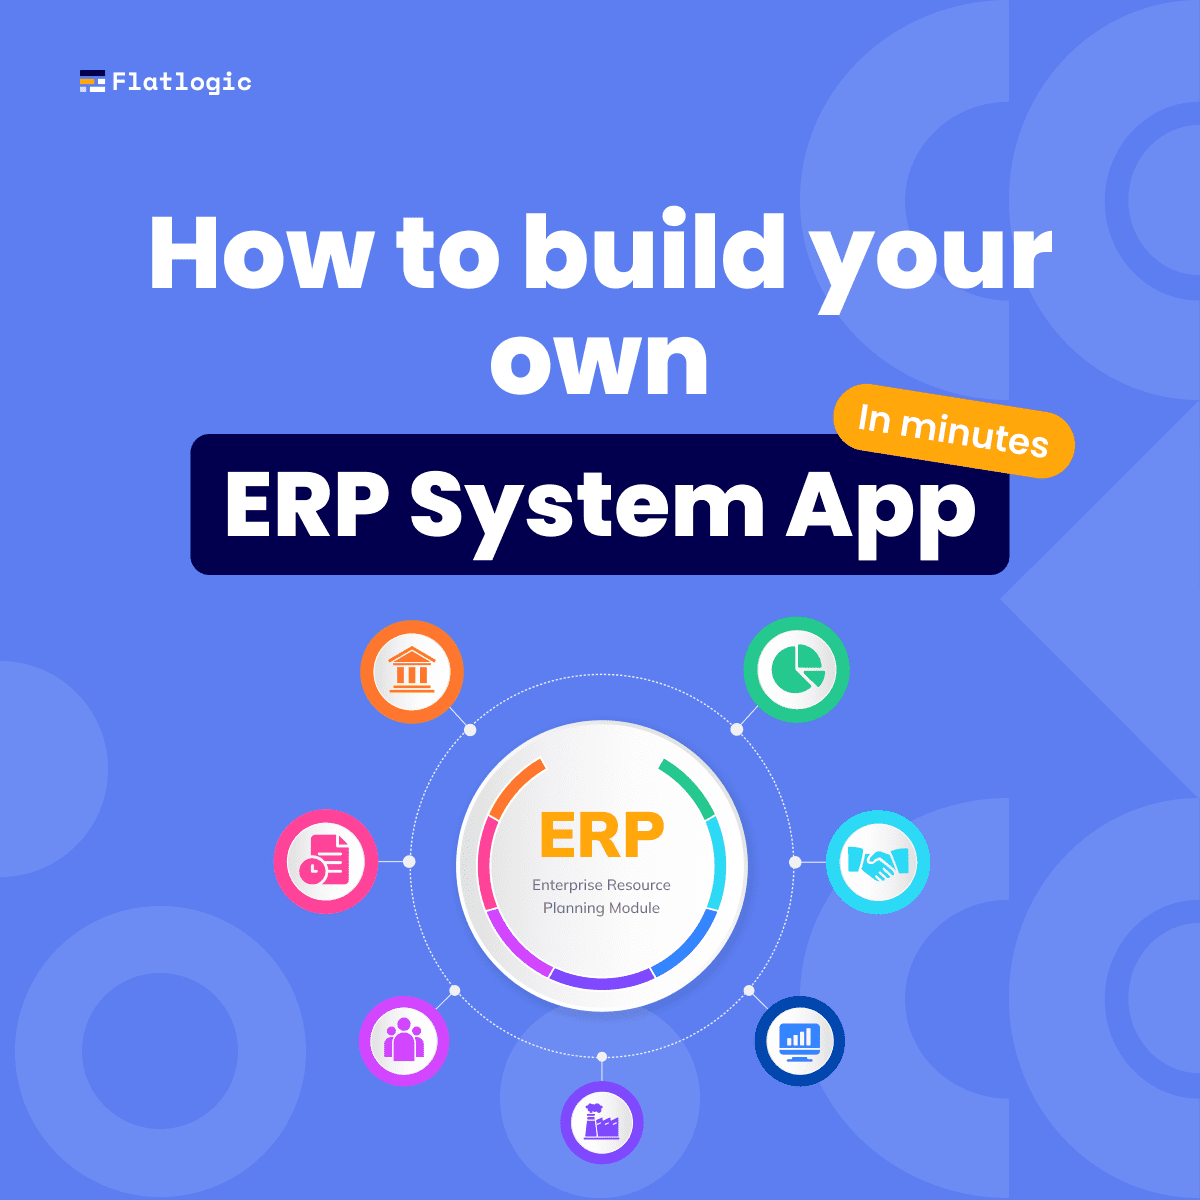 How to Build Your ERP System in Minutes